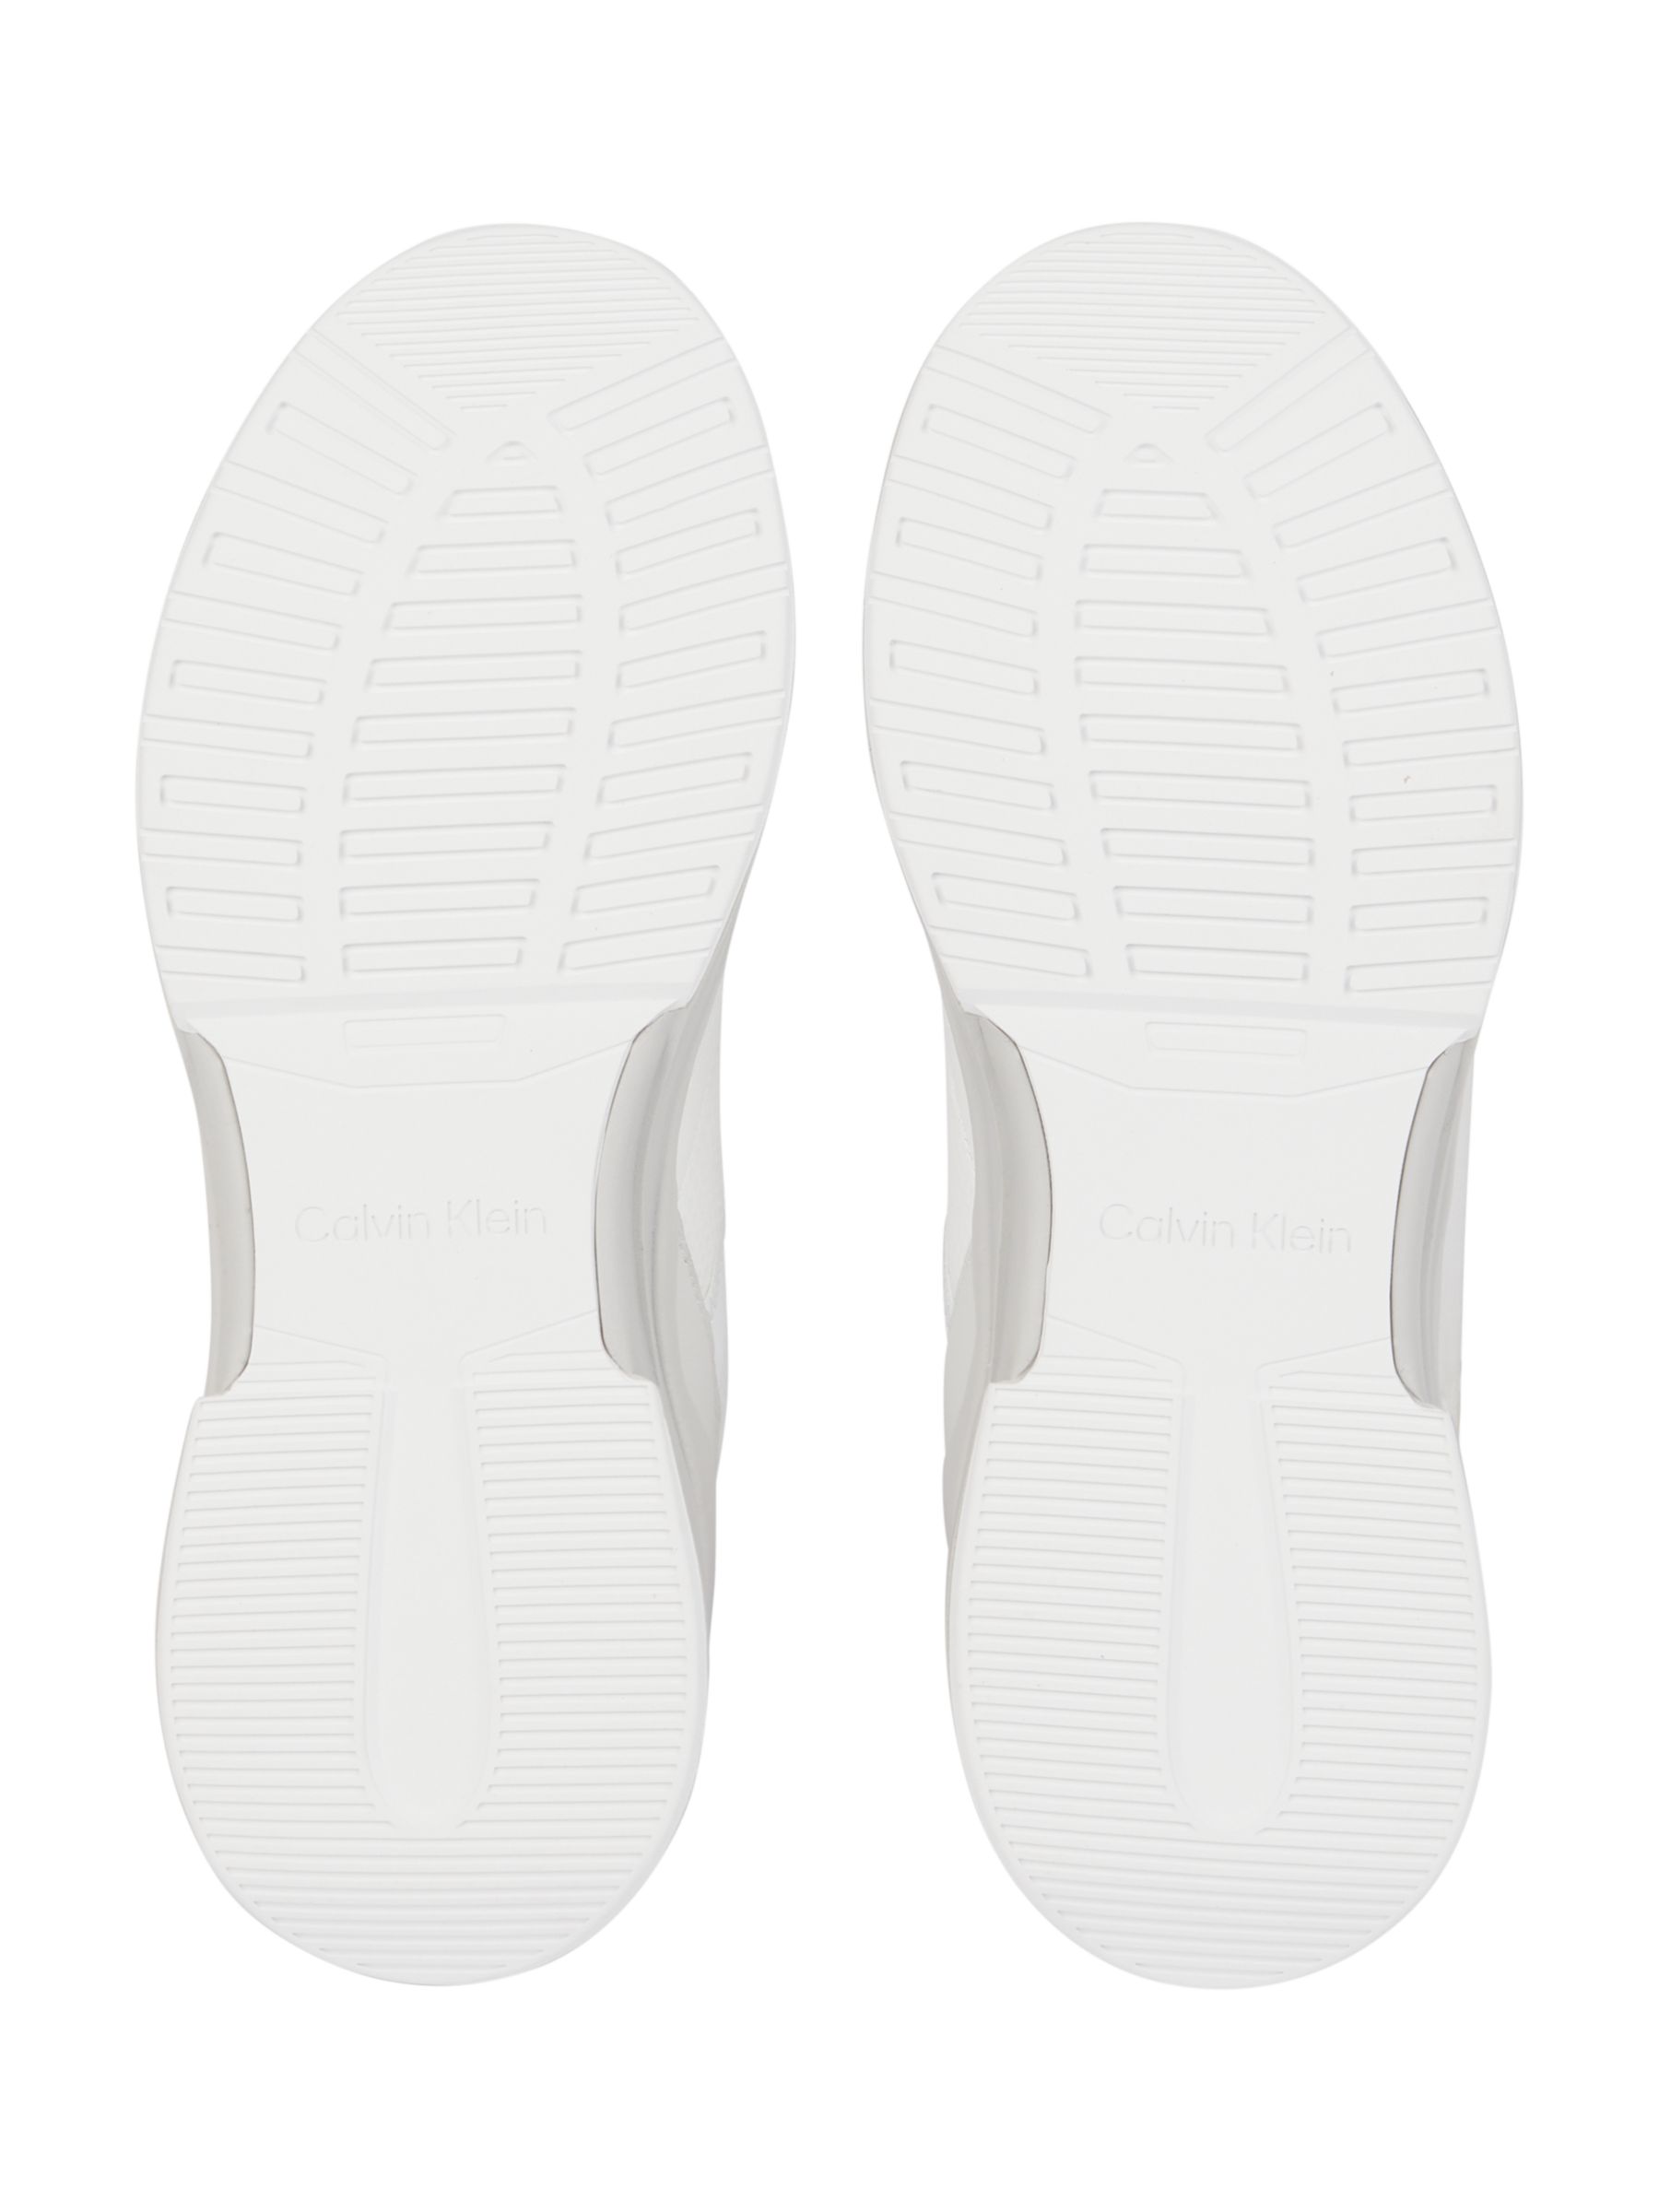 Buy Calvin Klein Leather Low Top Chunky Heel Trainers, White/Light Grey Online at johnlewis.com